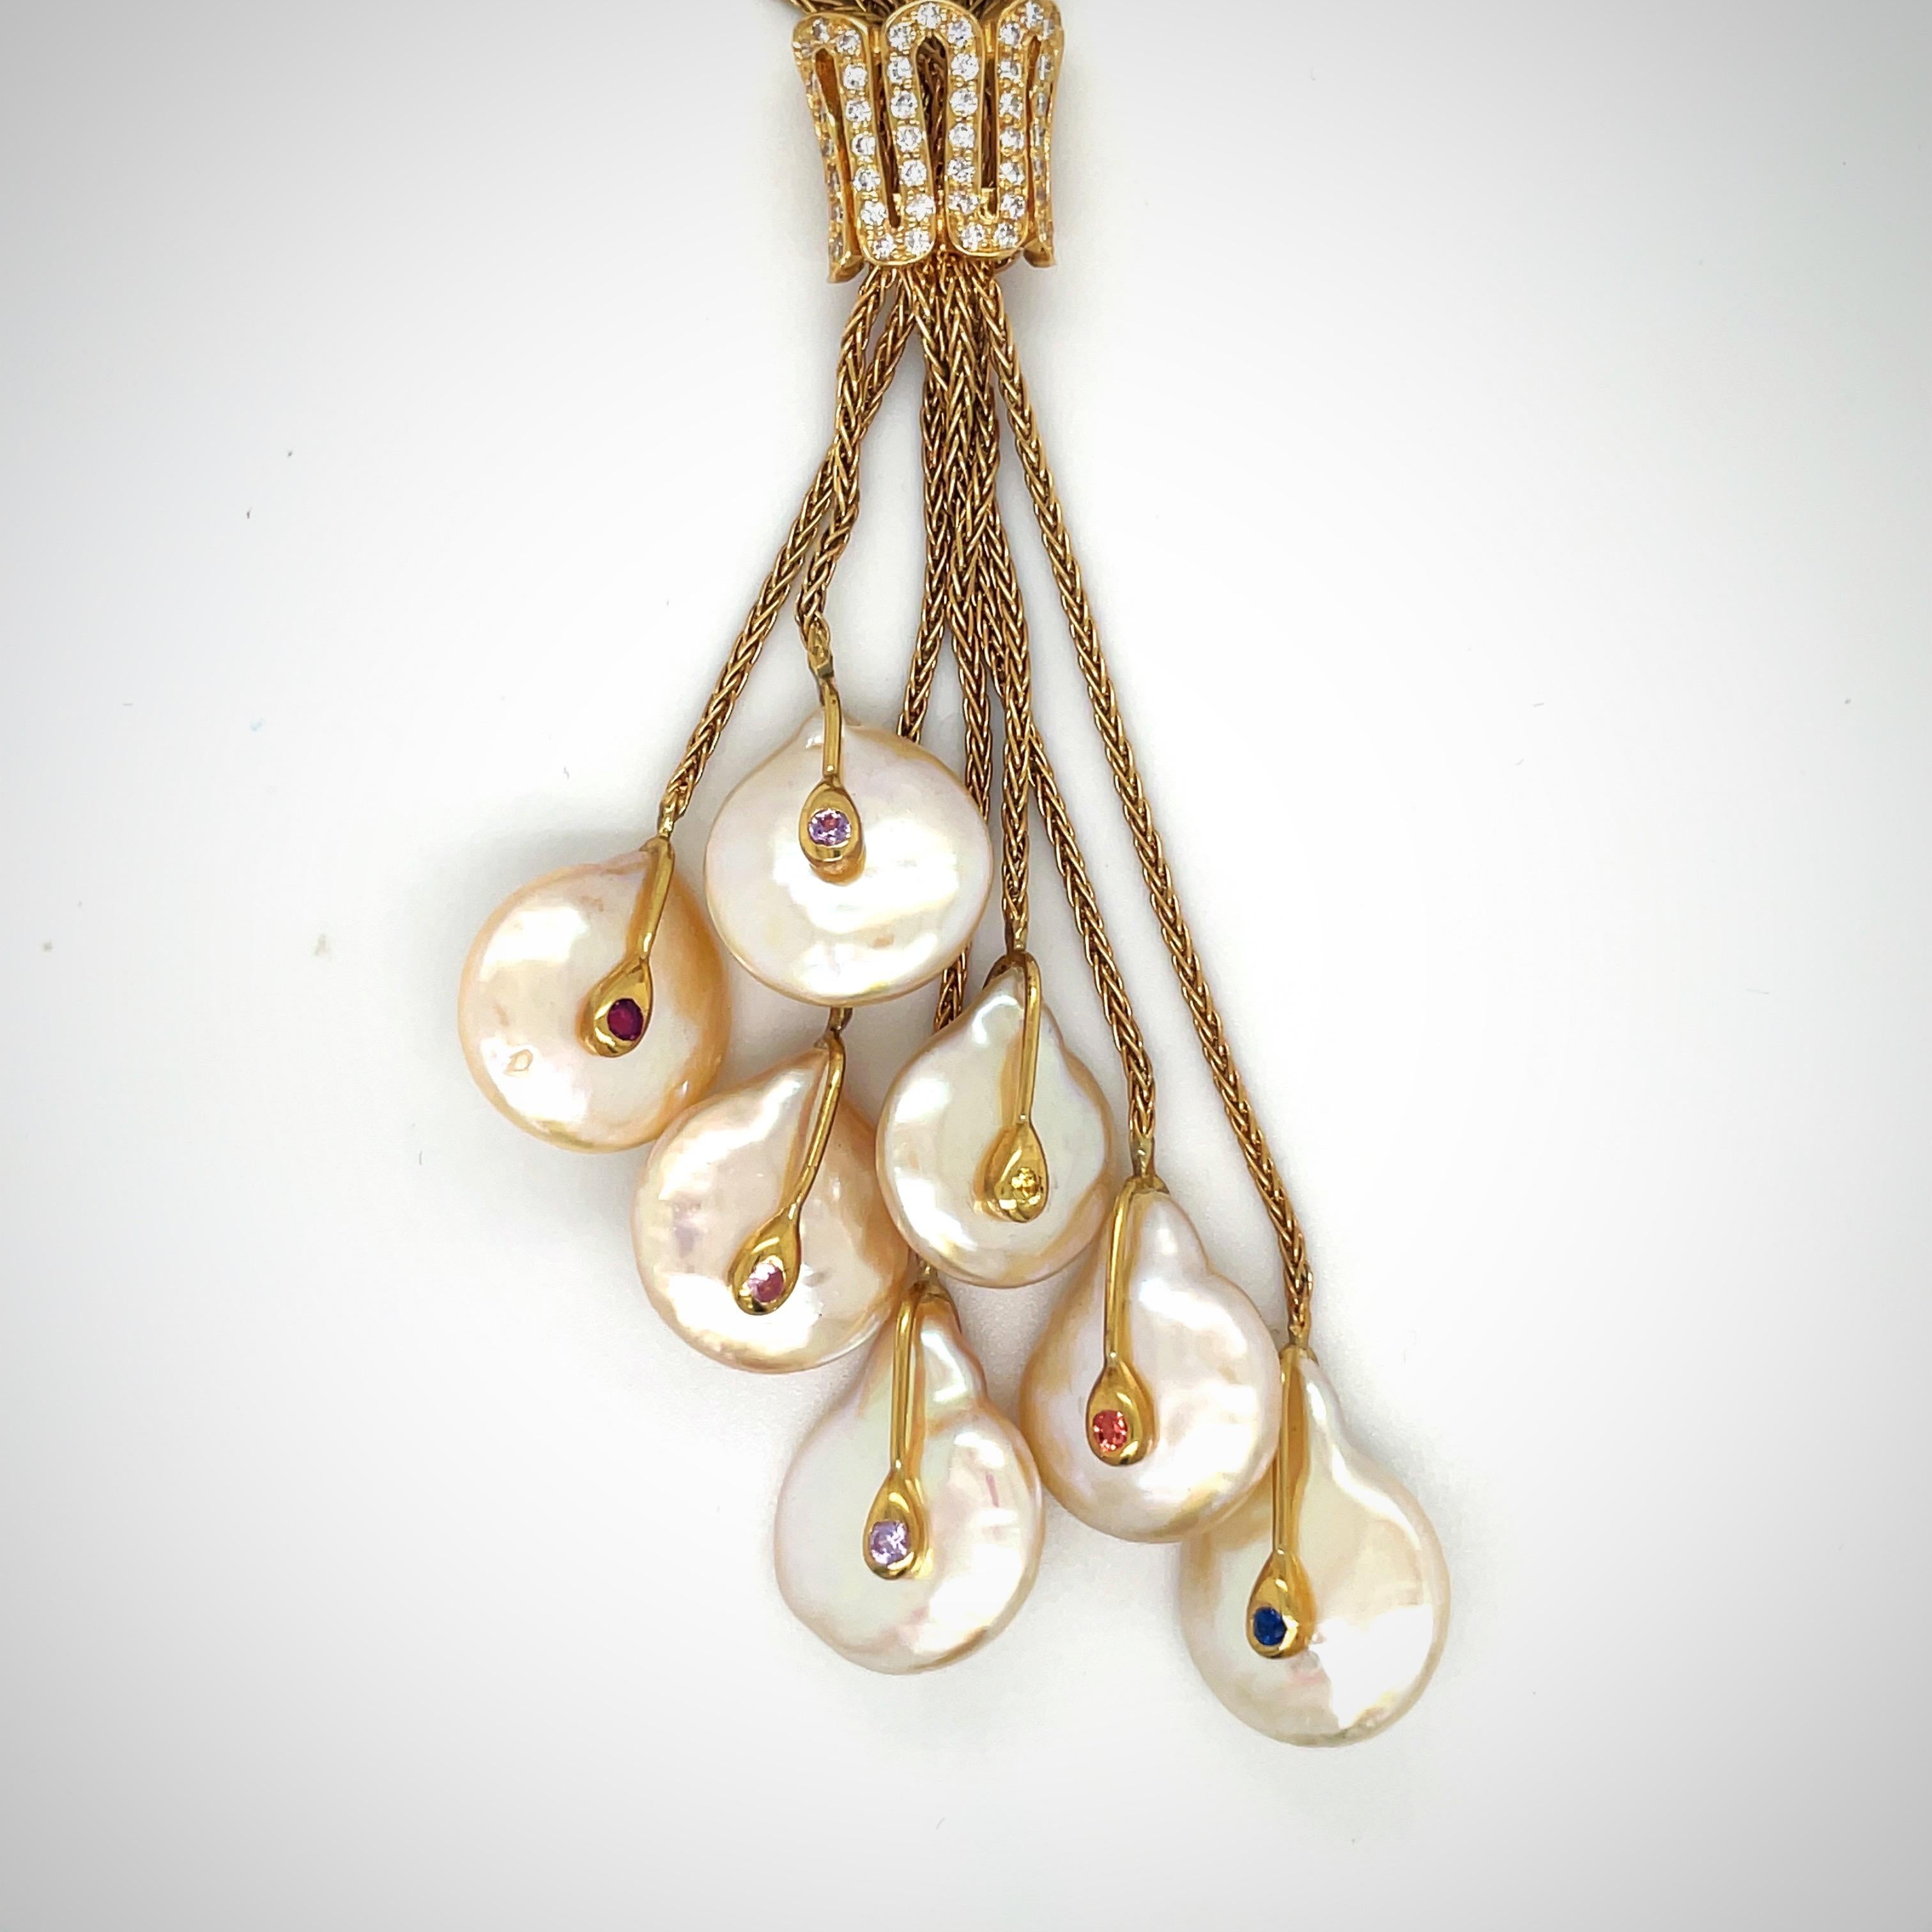 Rare organic pearls are Yvel's signature design. Cellini Jewelers NYC presents their 18 karat yellow gold necklace with 7 flat freshwater pearls. The 21